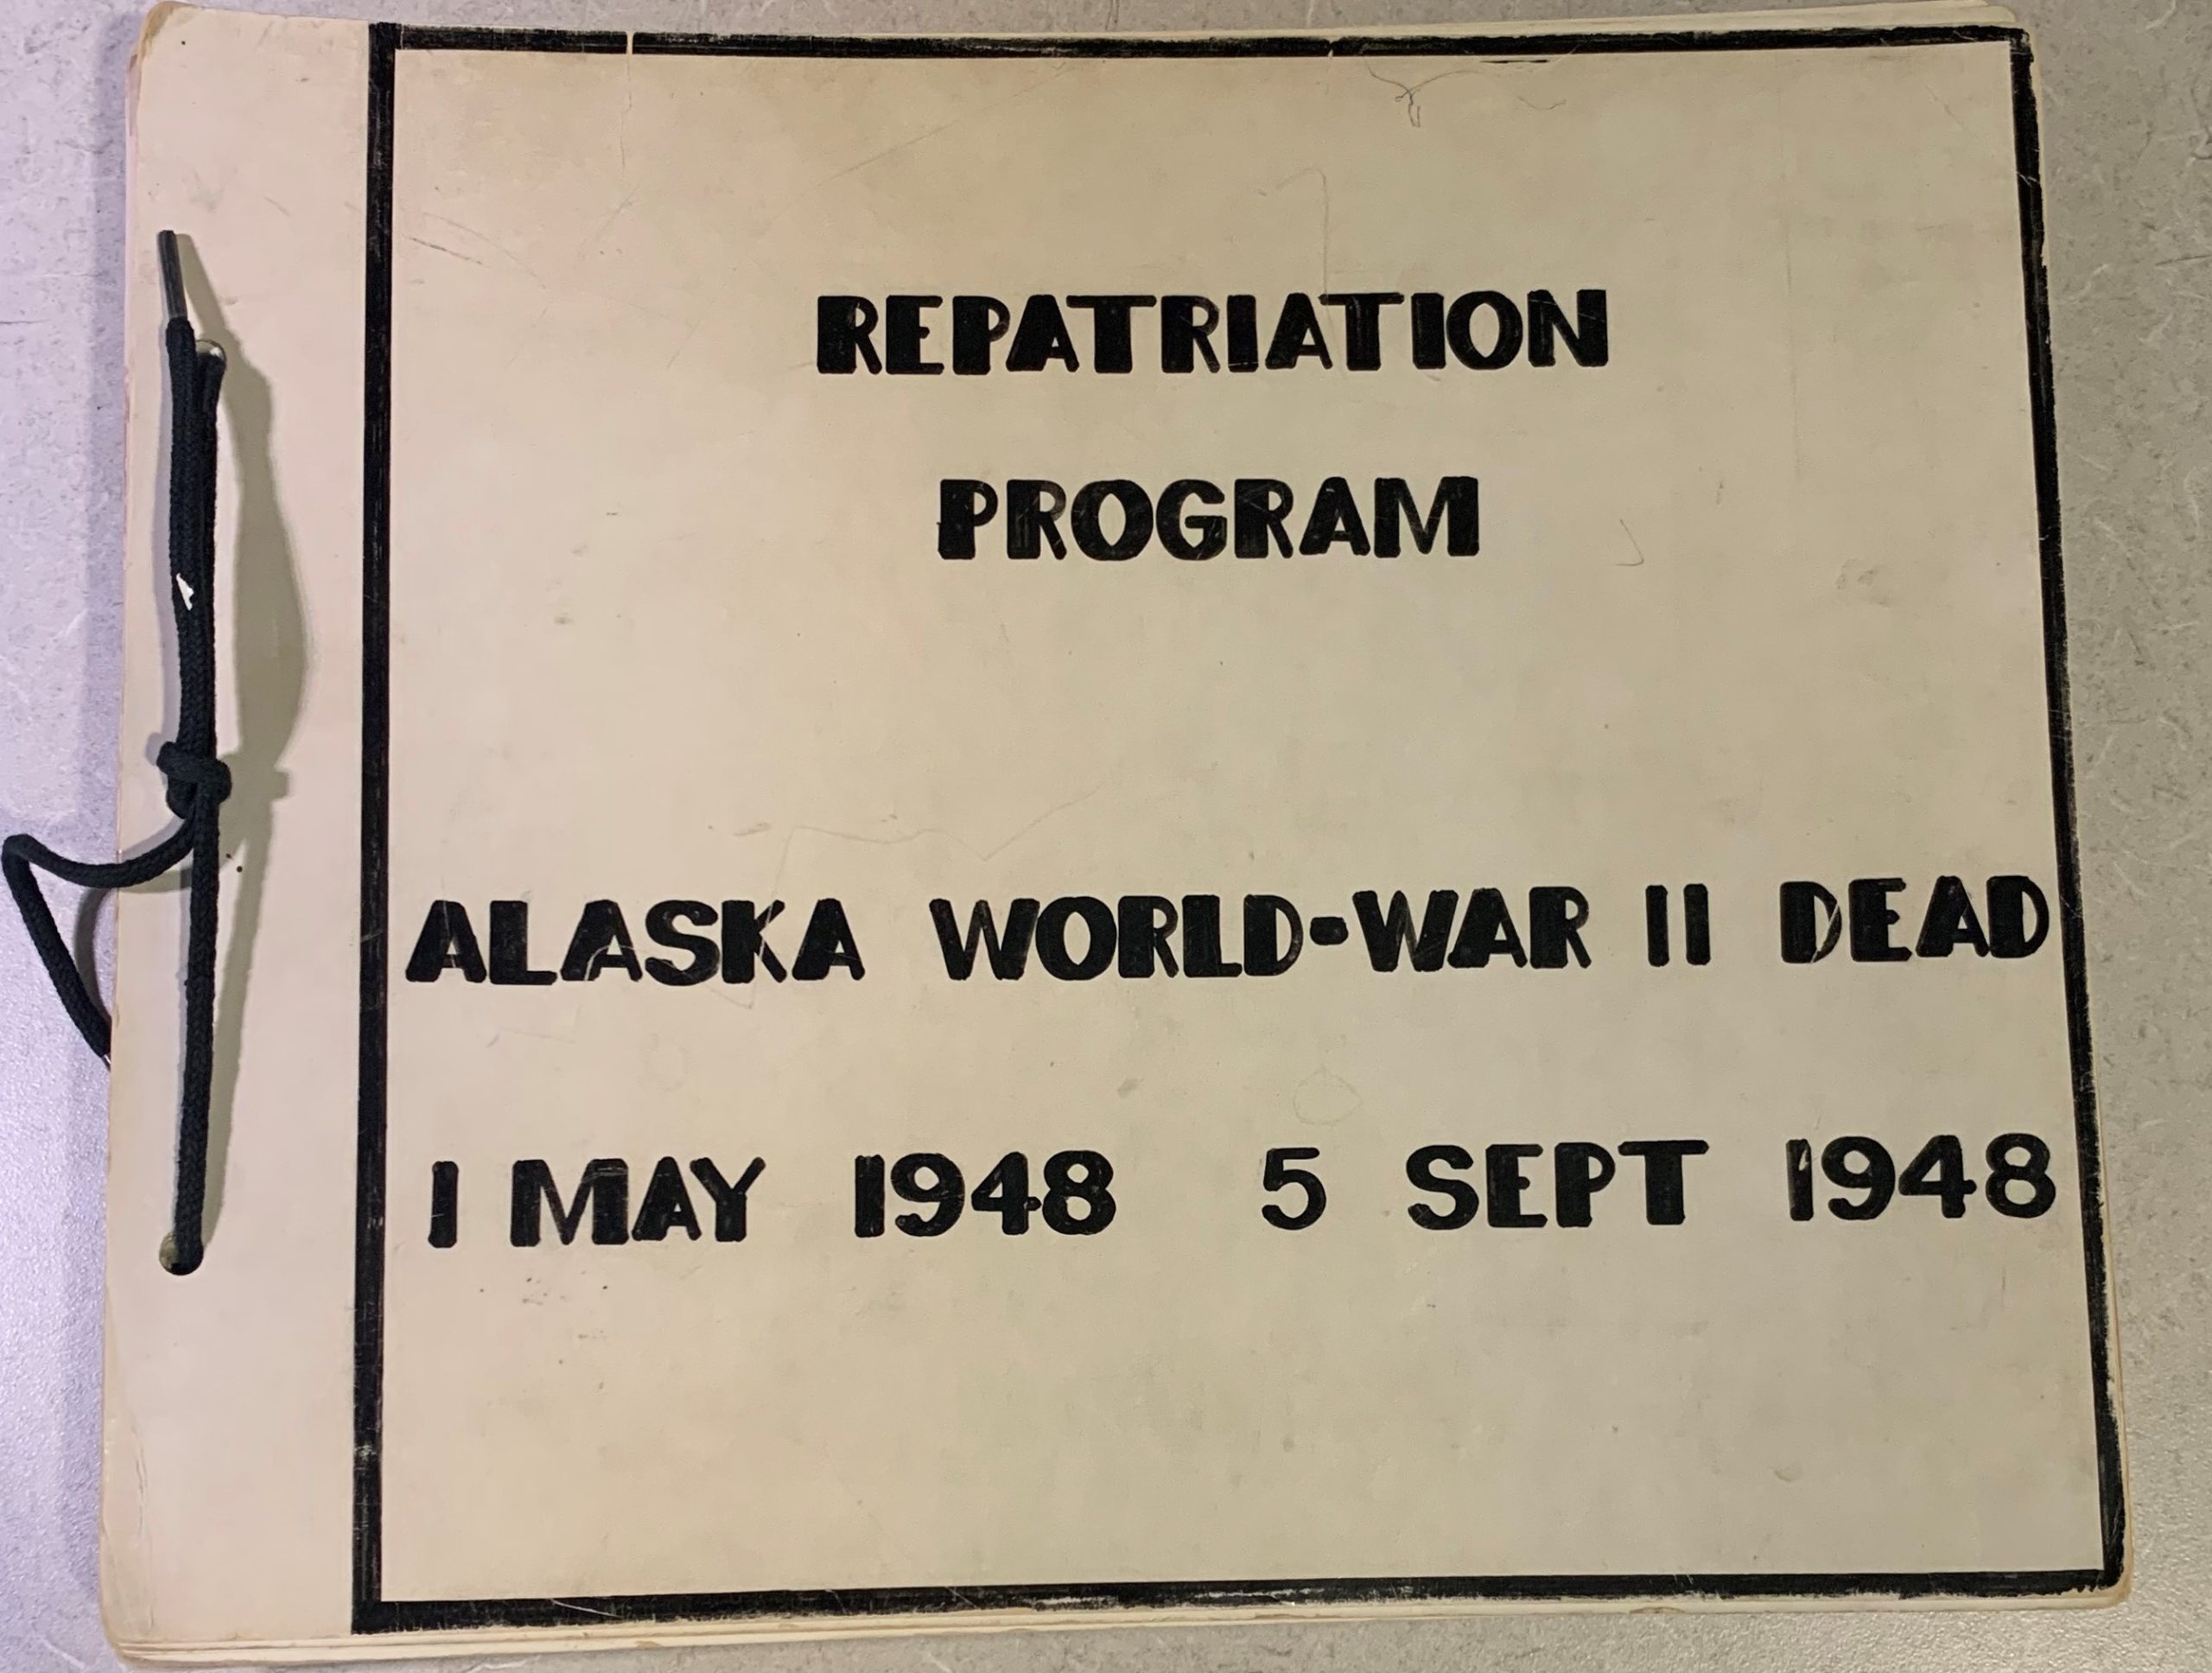 Album of photos and news clippings created by U.S. Army, Alaska. (NCA Collection).